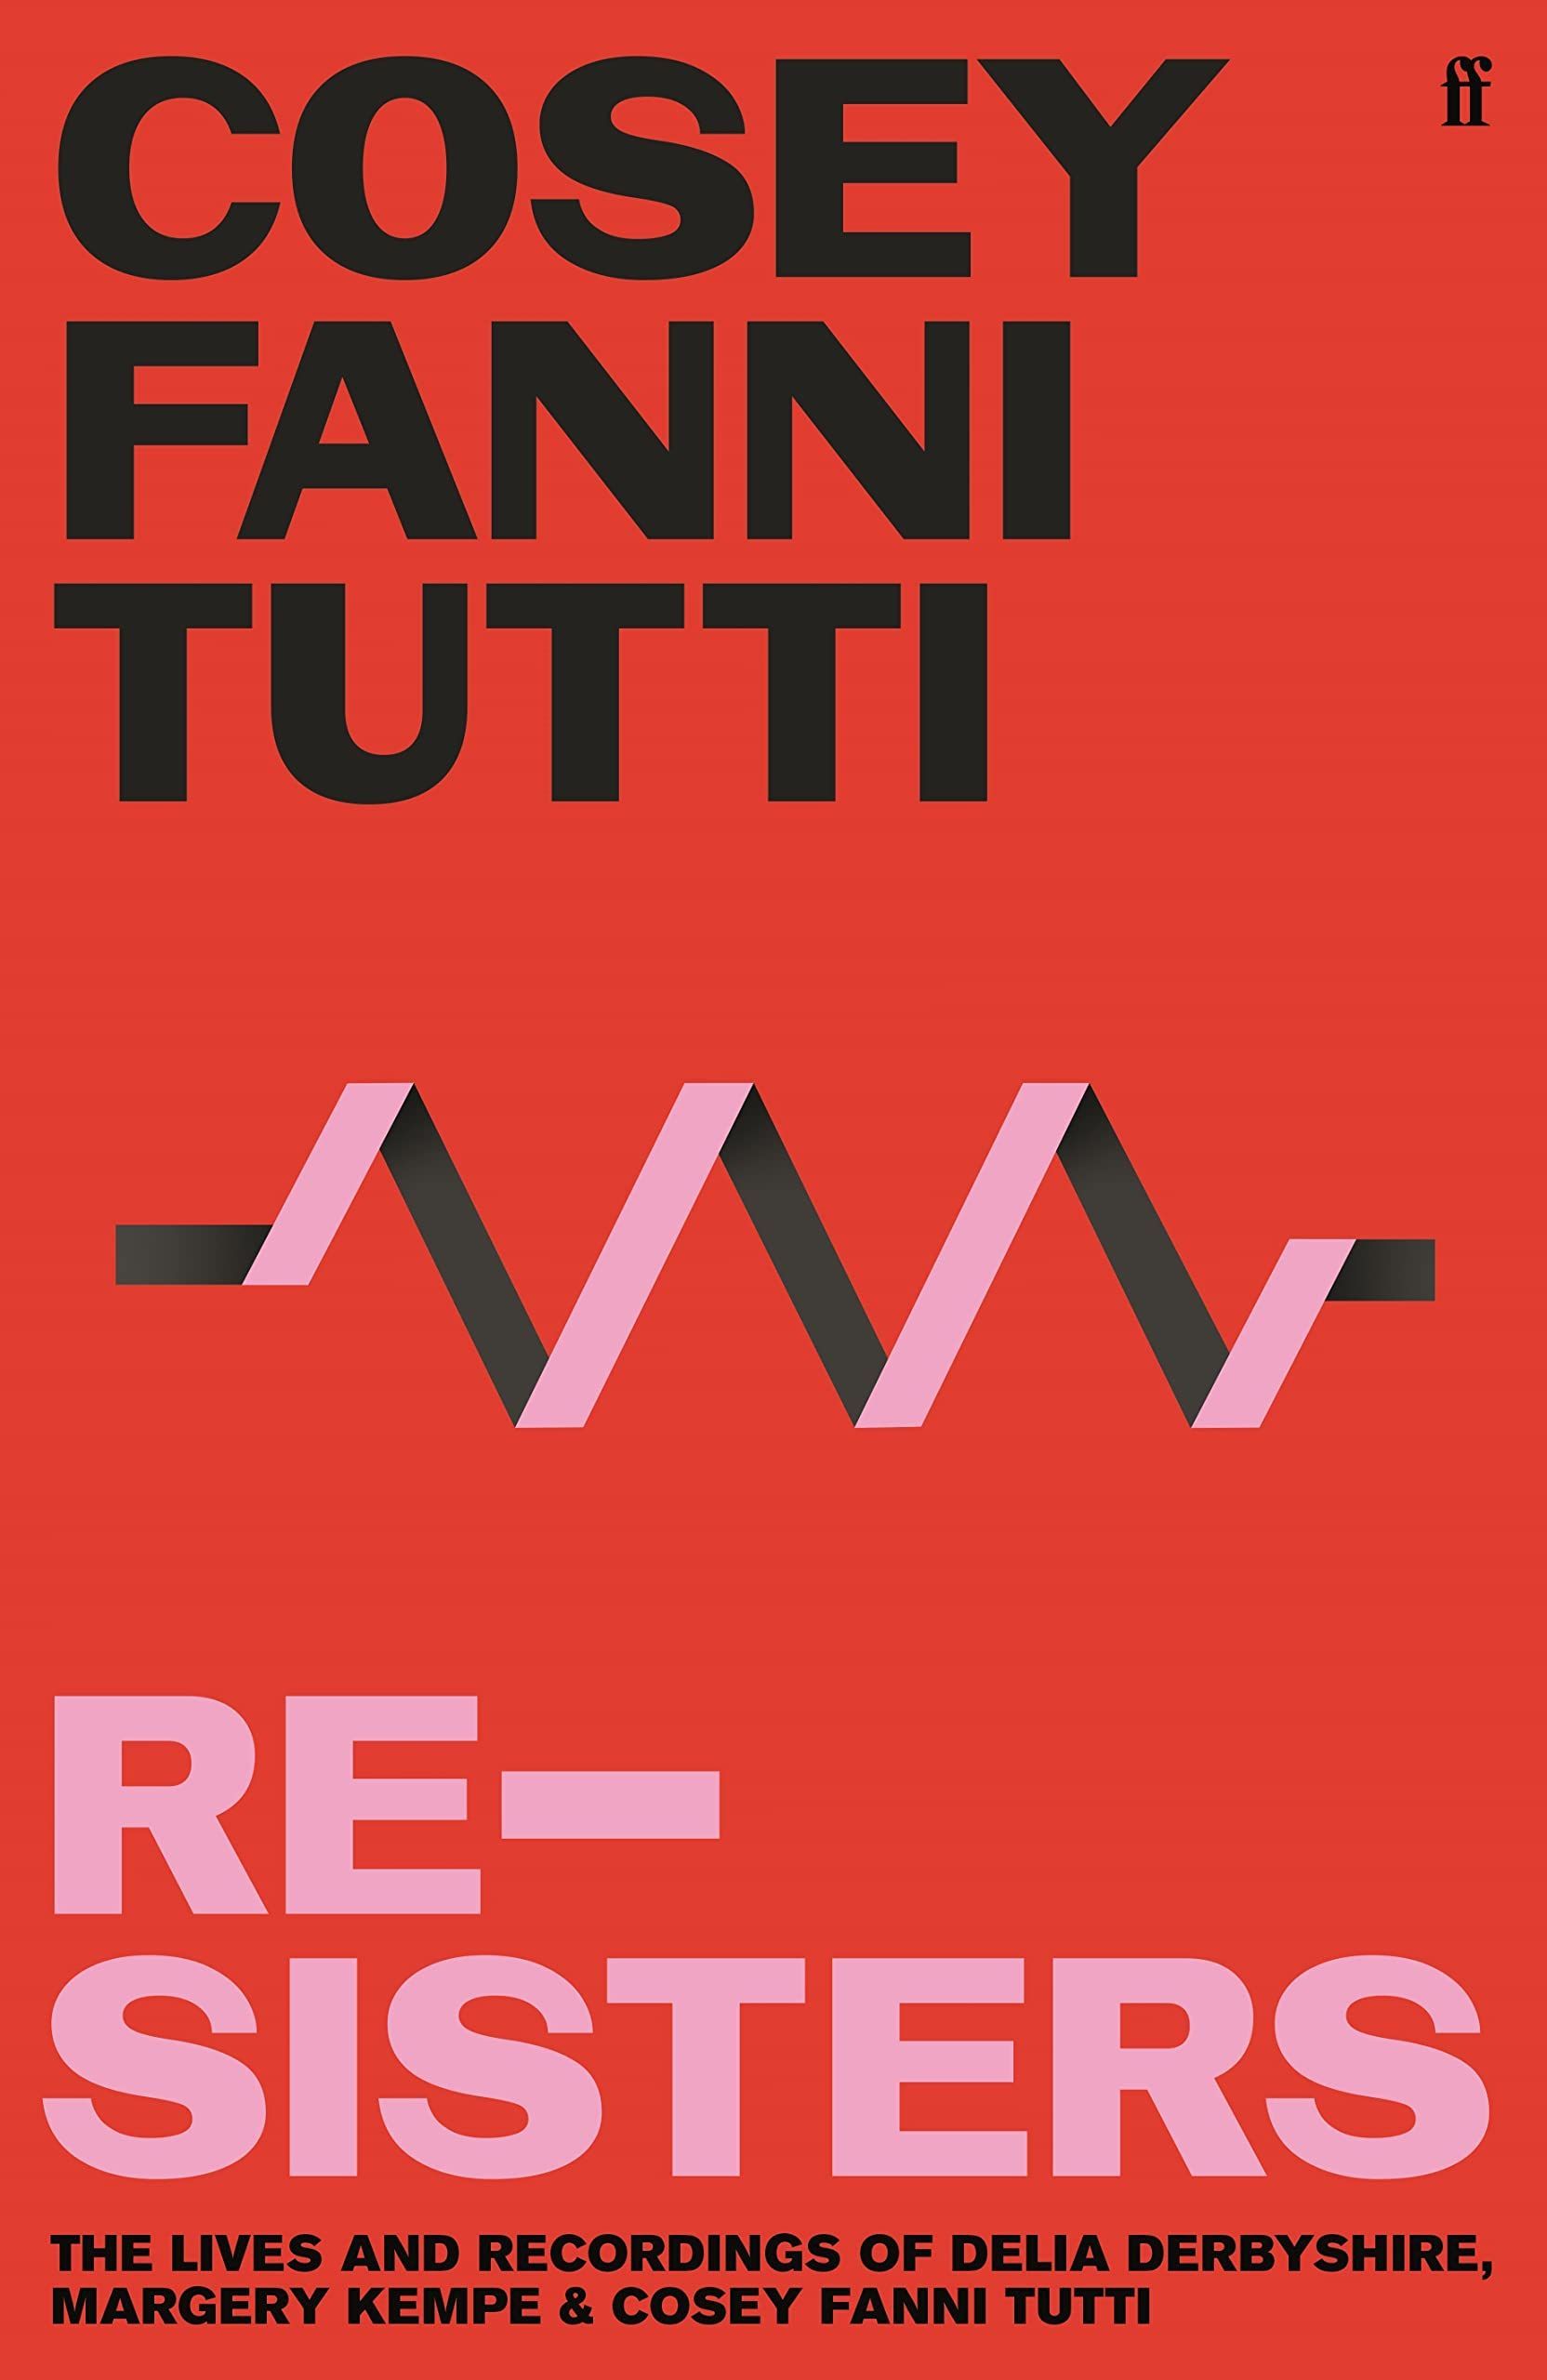 These Creatures: On Cosey Fanni Tutti’s “Re-Sisters”